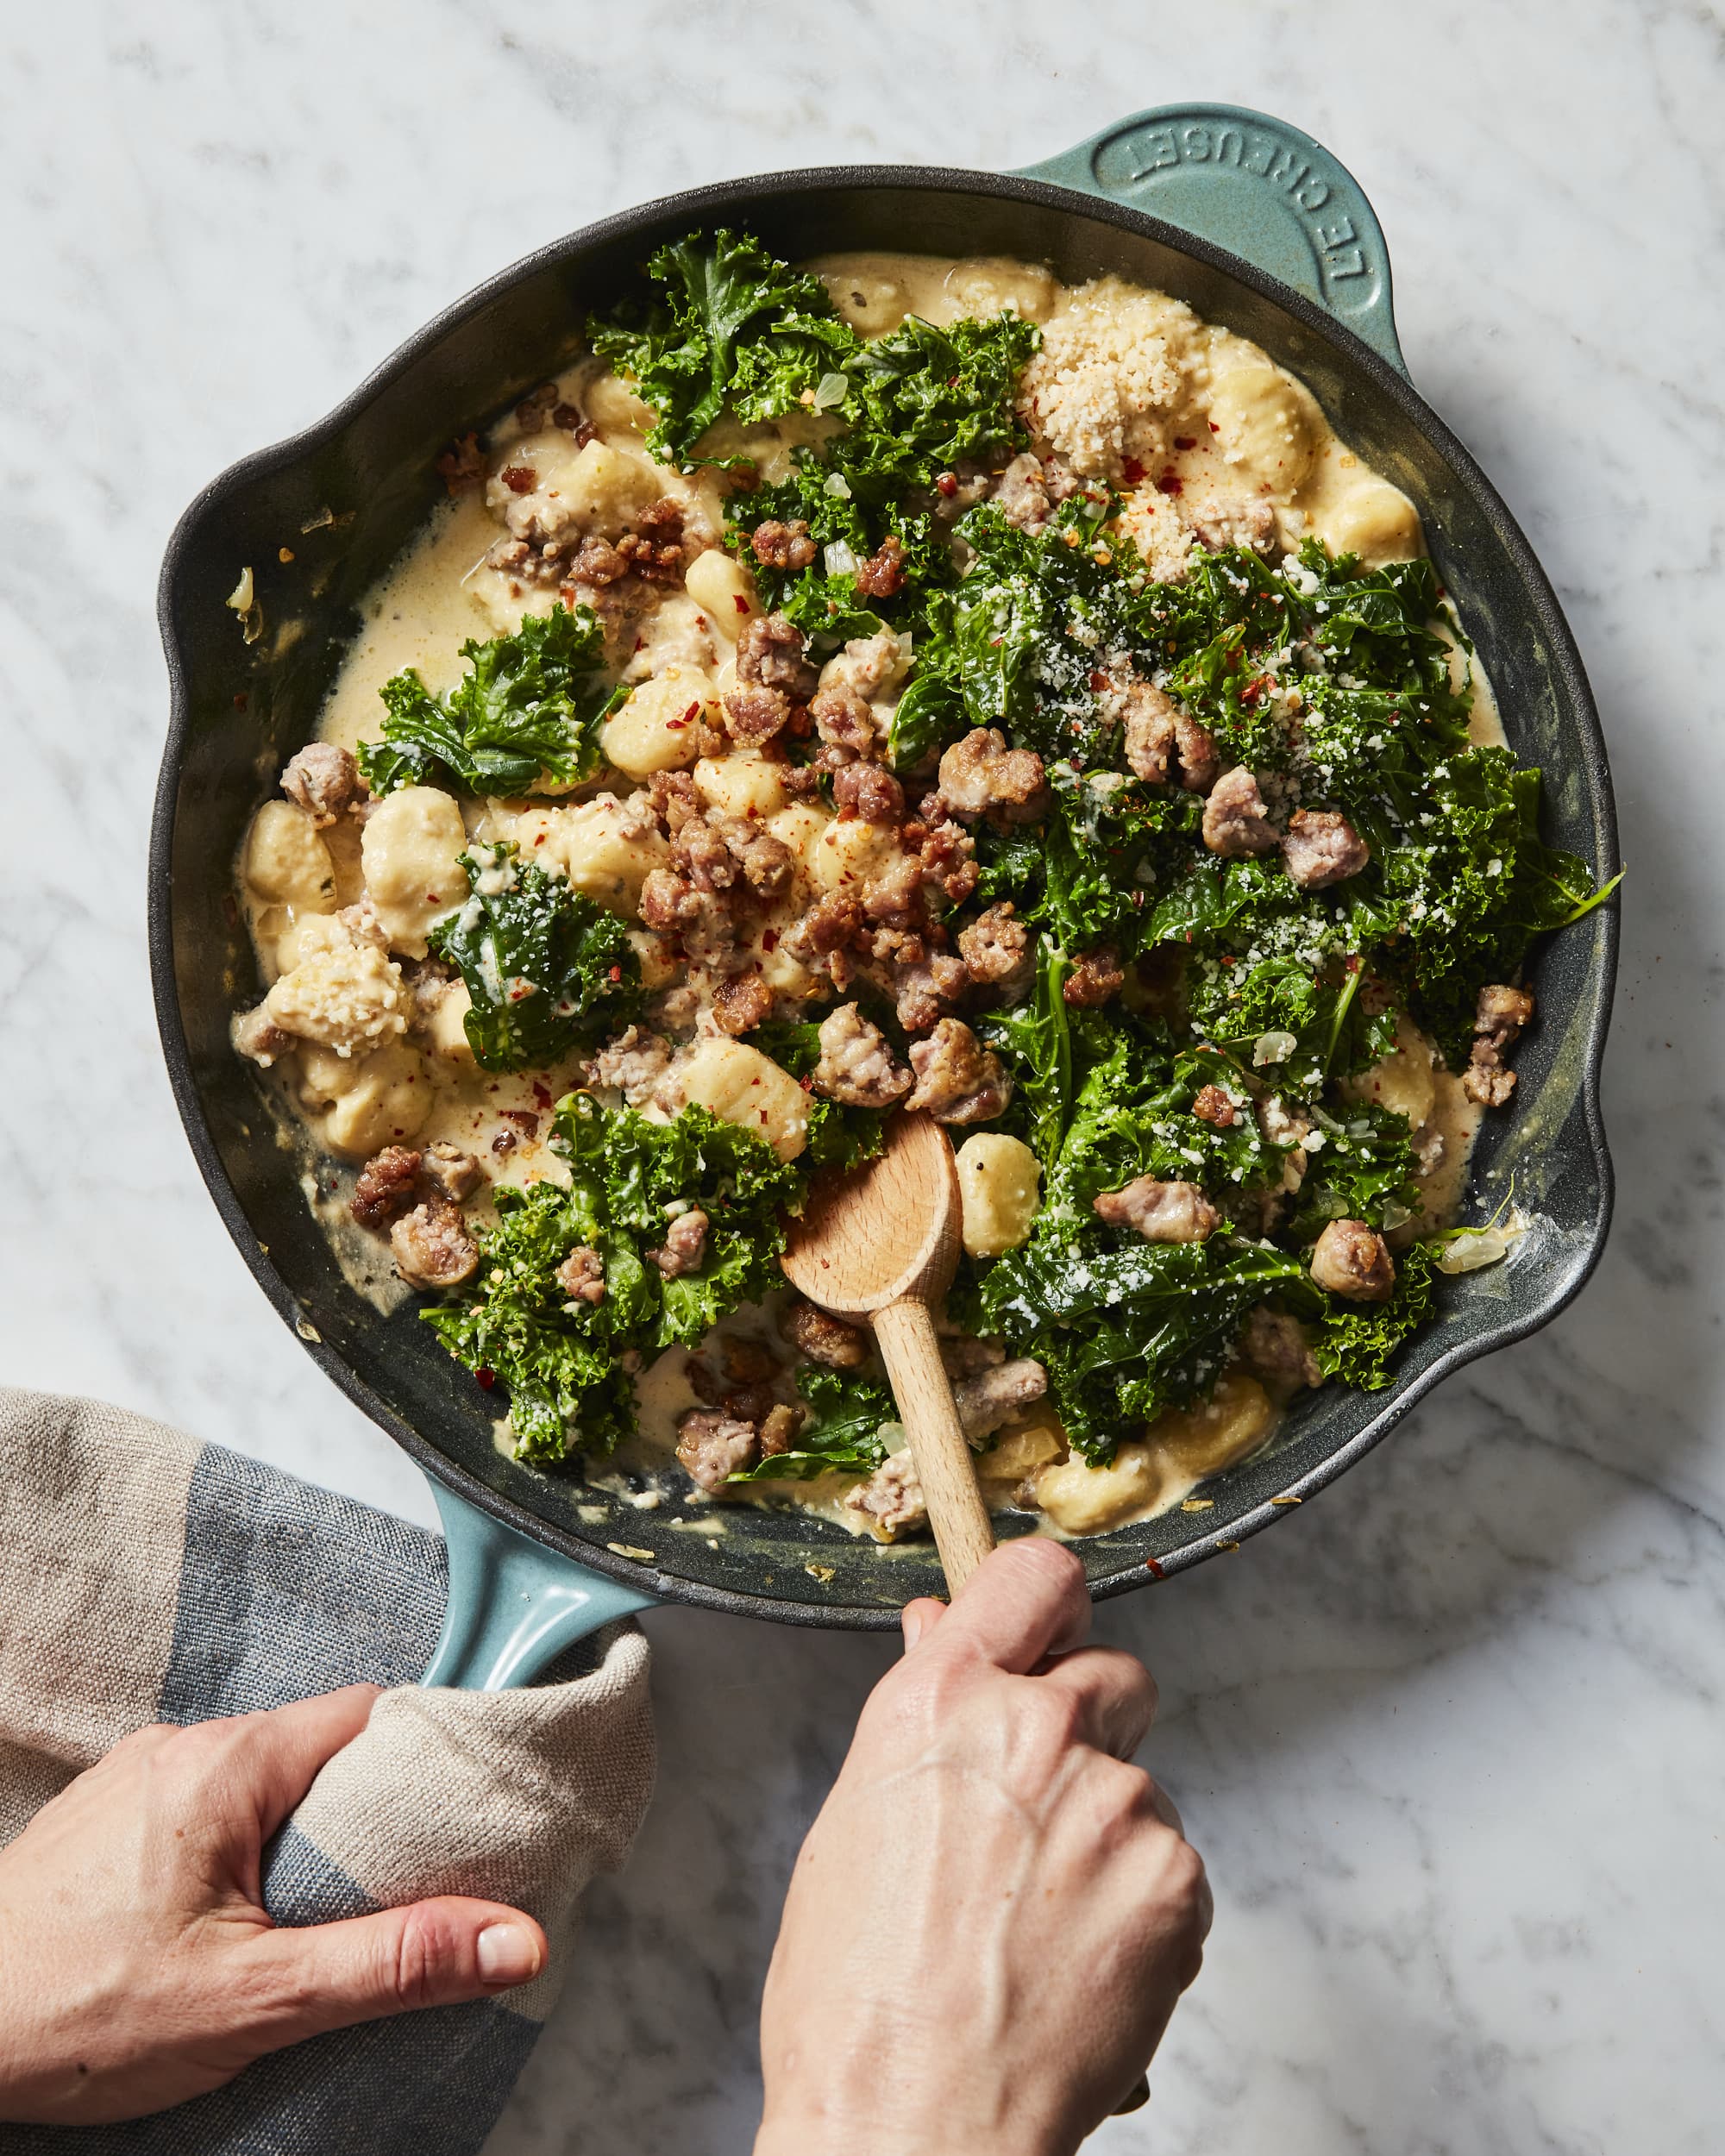 https://cdn.apartmenttherapy.info/image/upload/v1662435919/k/Photo/Recipes/2022-10-4-ingredient-creamy-gnocchi-with-kale-and-sausage/4-ingredient-creamy-gnocchi-with-kale-and-sausage-0053.jpg